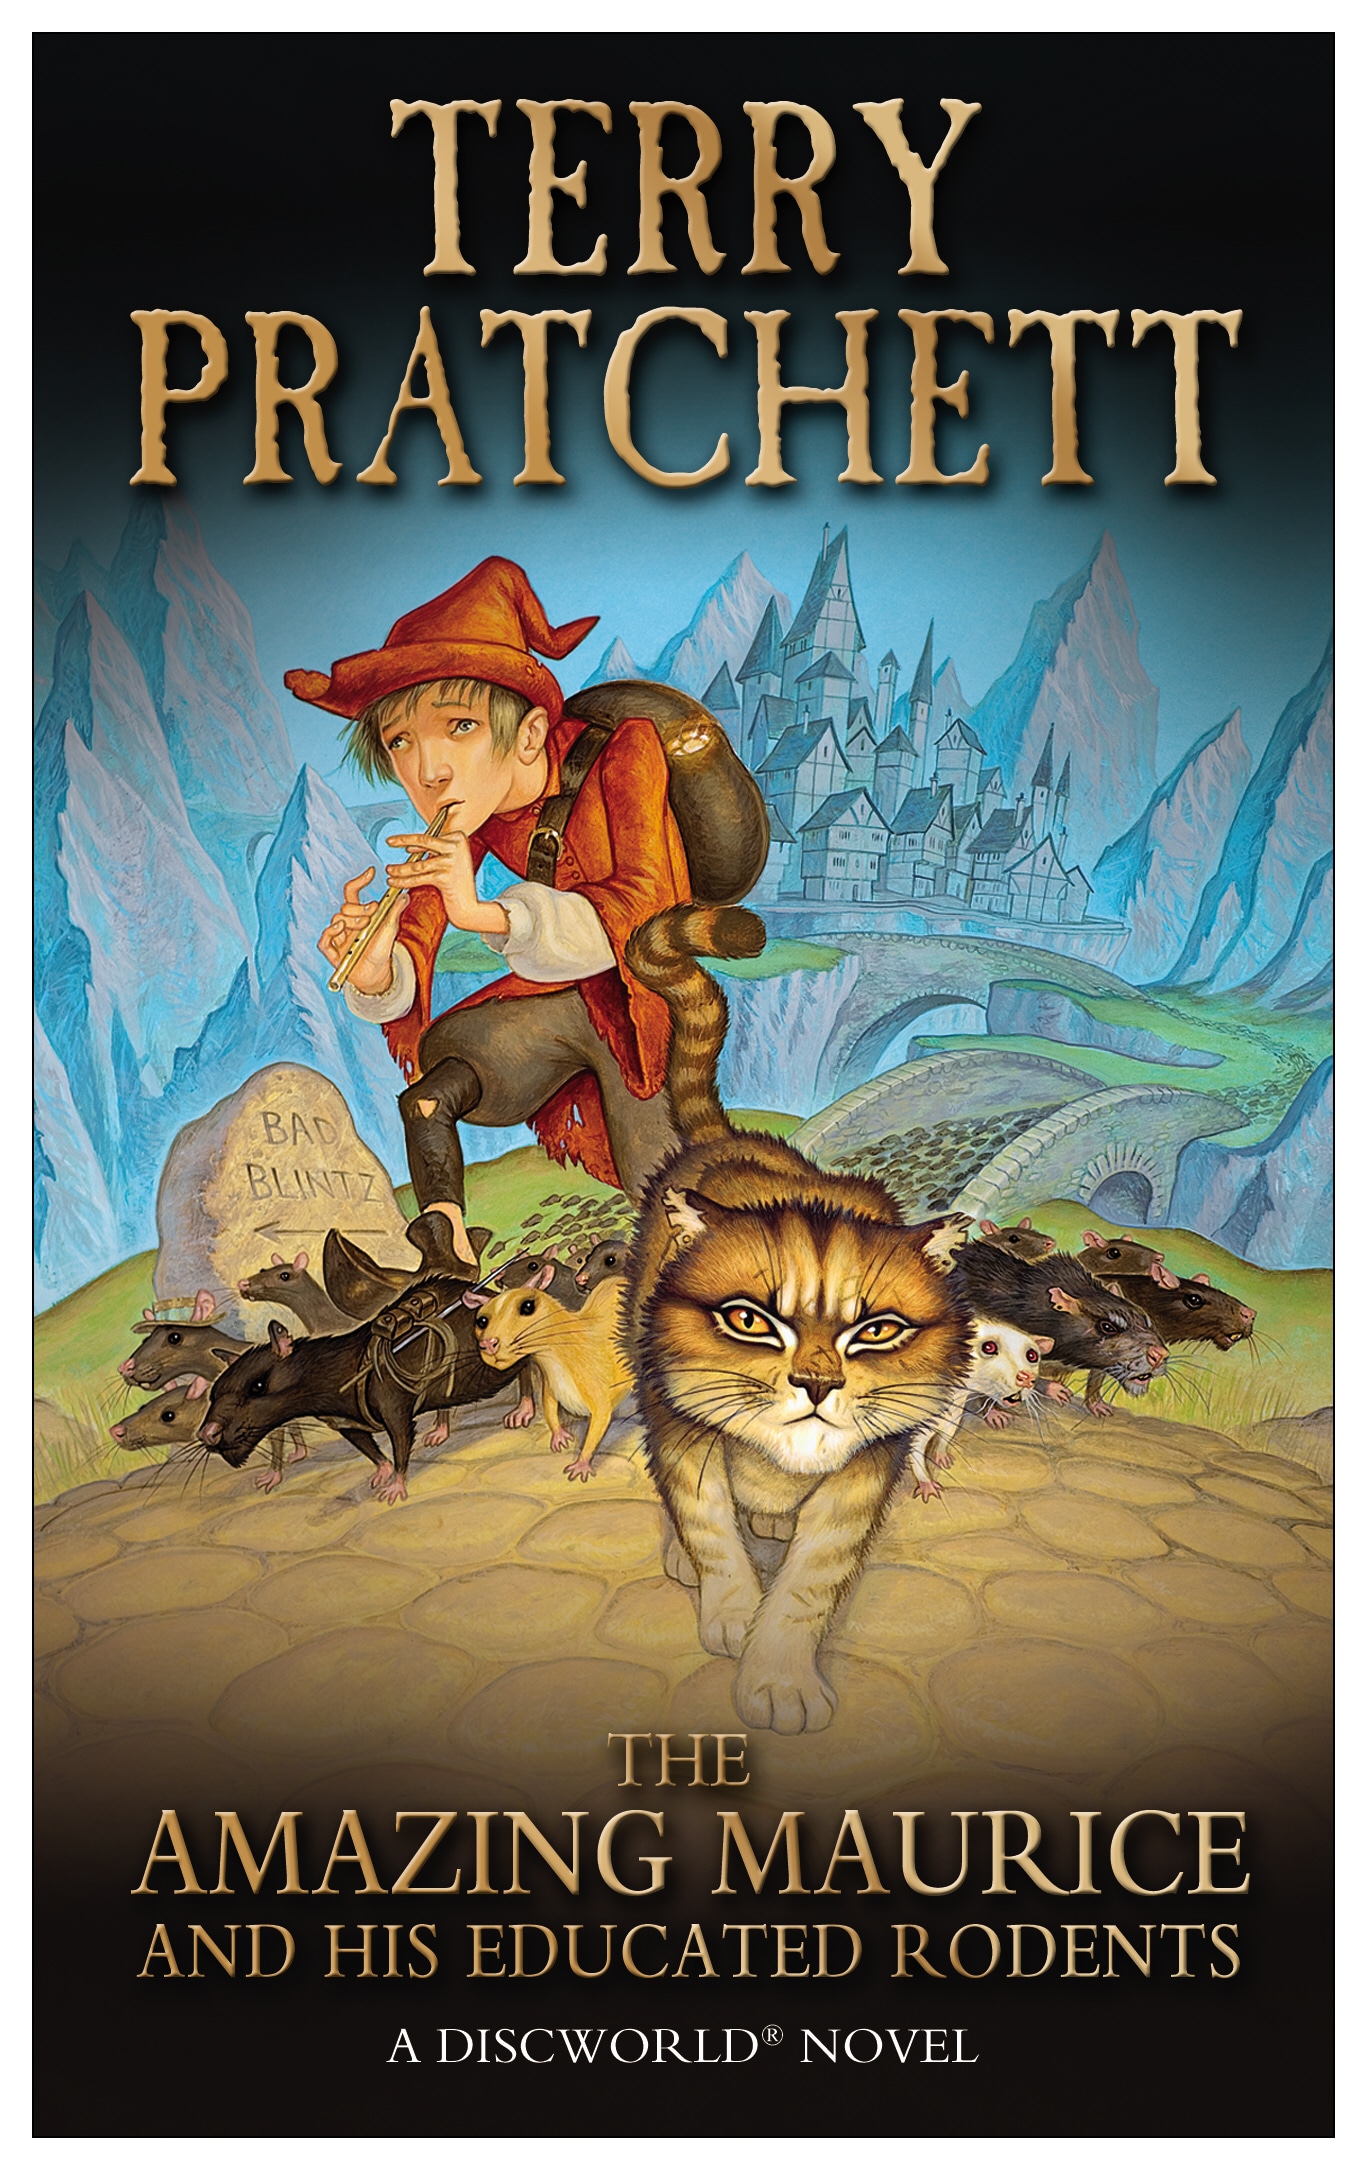 Book “The Amazing Maurice and his Educated Rodents” by Terry Pratchett — May 26, 2011